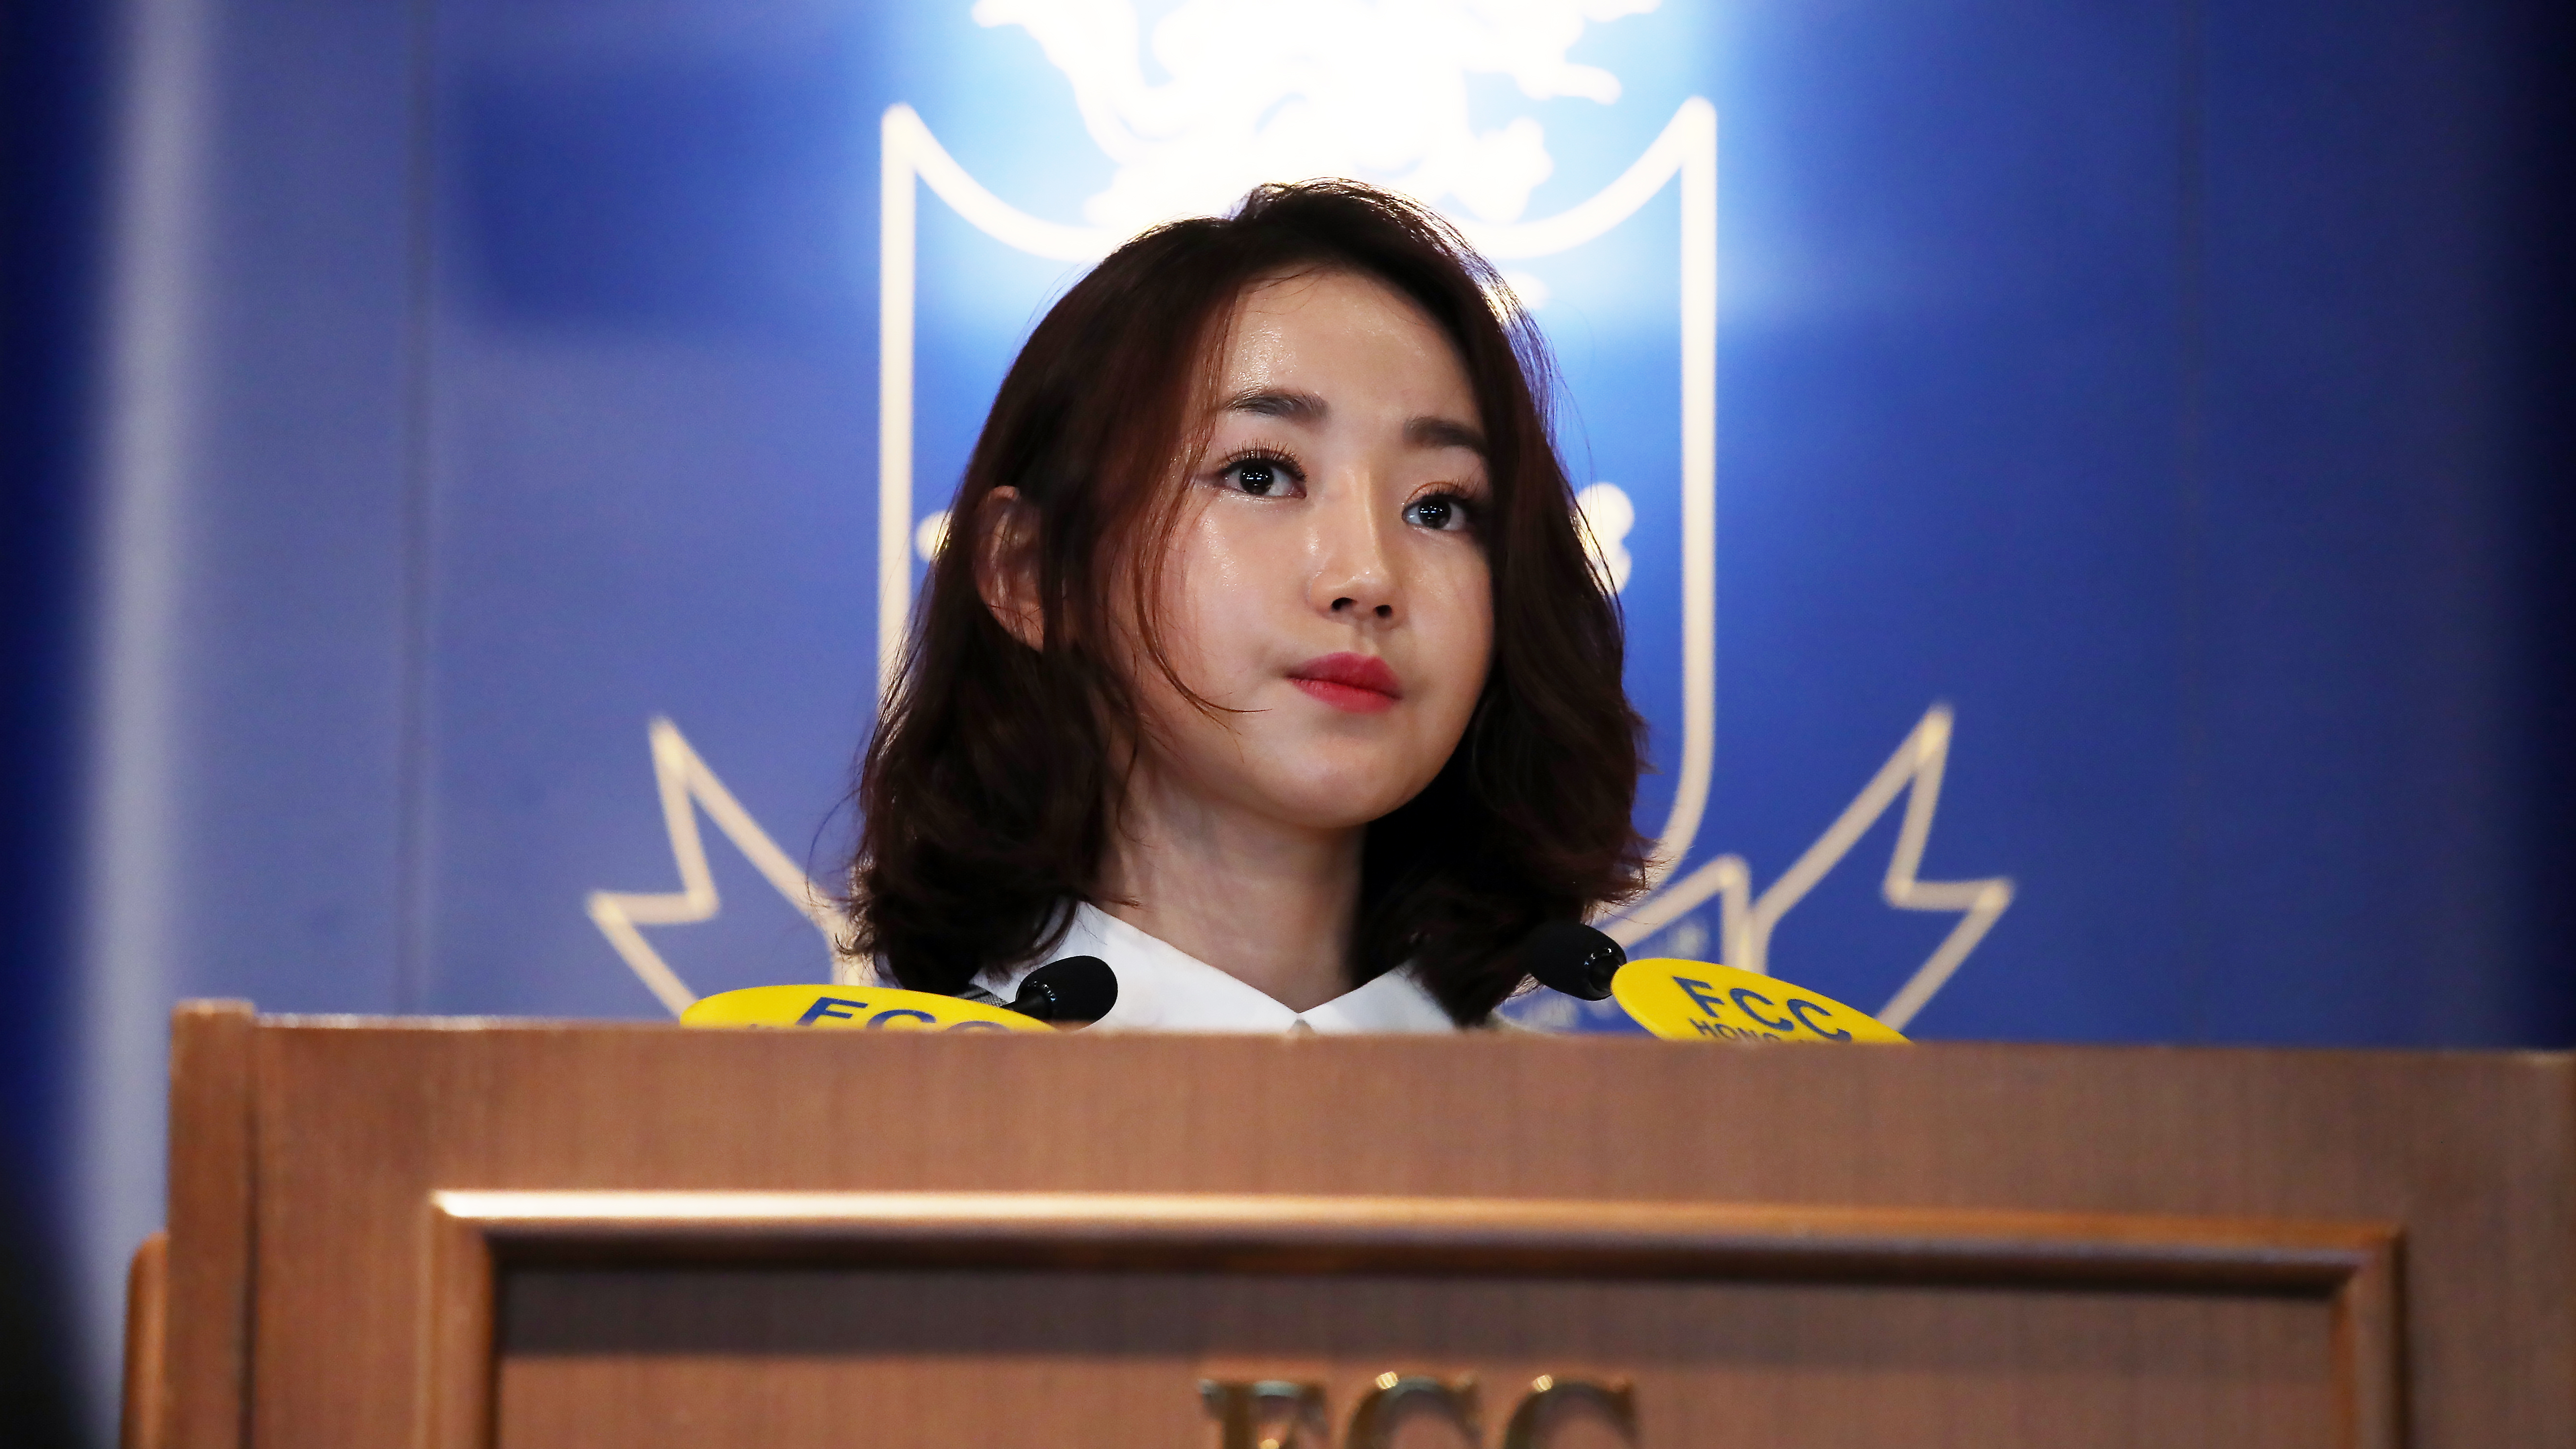 Yeonmi Park speaking at the Foreign Correspondents' Club Hong Kong Luncheon on March 4, 2017. | Source: Getty Images